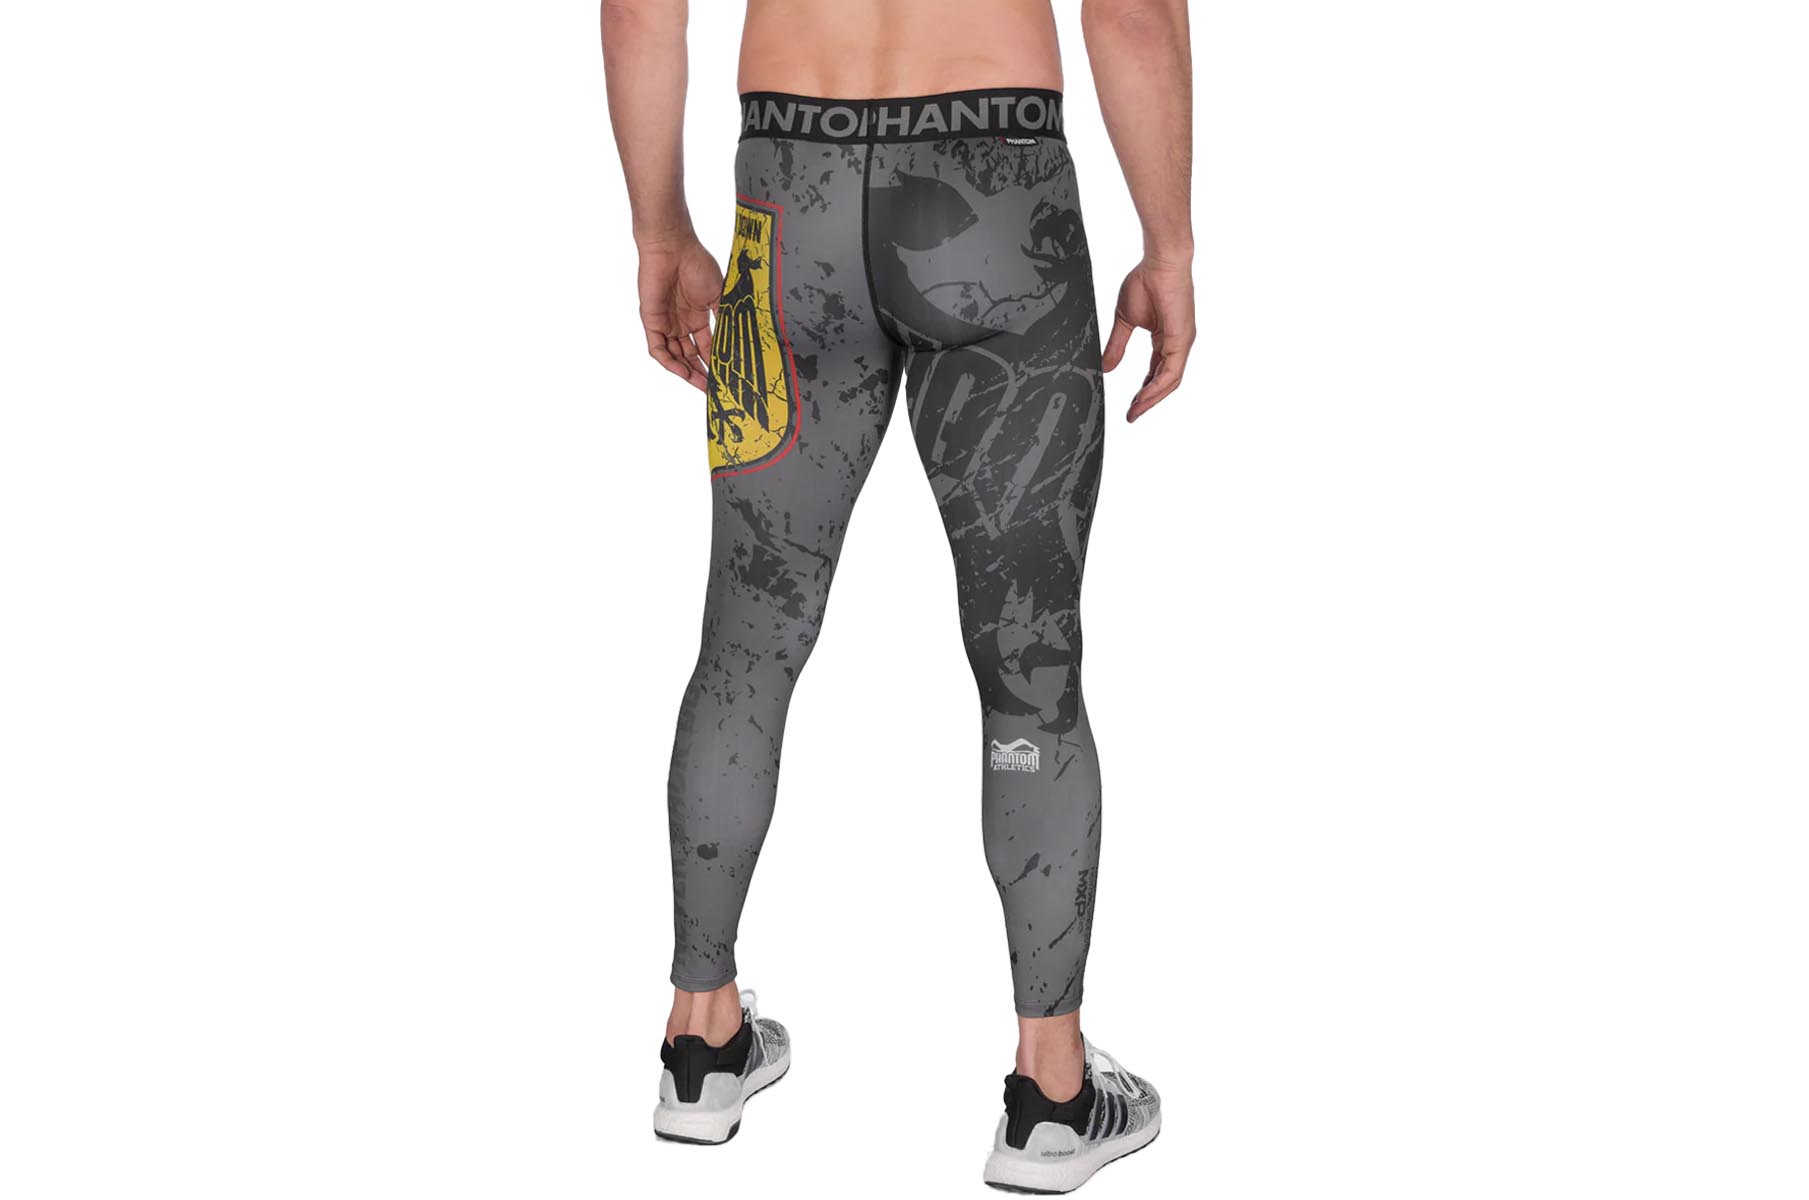 LEICHR Mens Compression Pants Active Athletic Leggings with Pockets Running  Baselayer Tights Cycling Workout Pants : Amazon.in: Clothing & Accessories